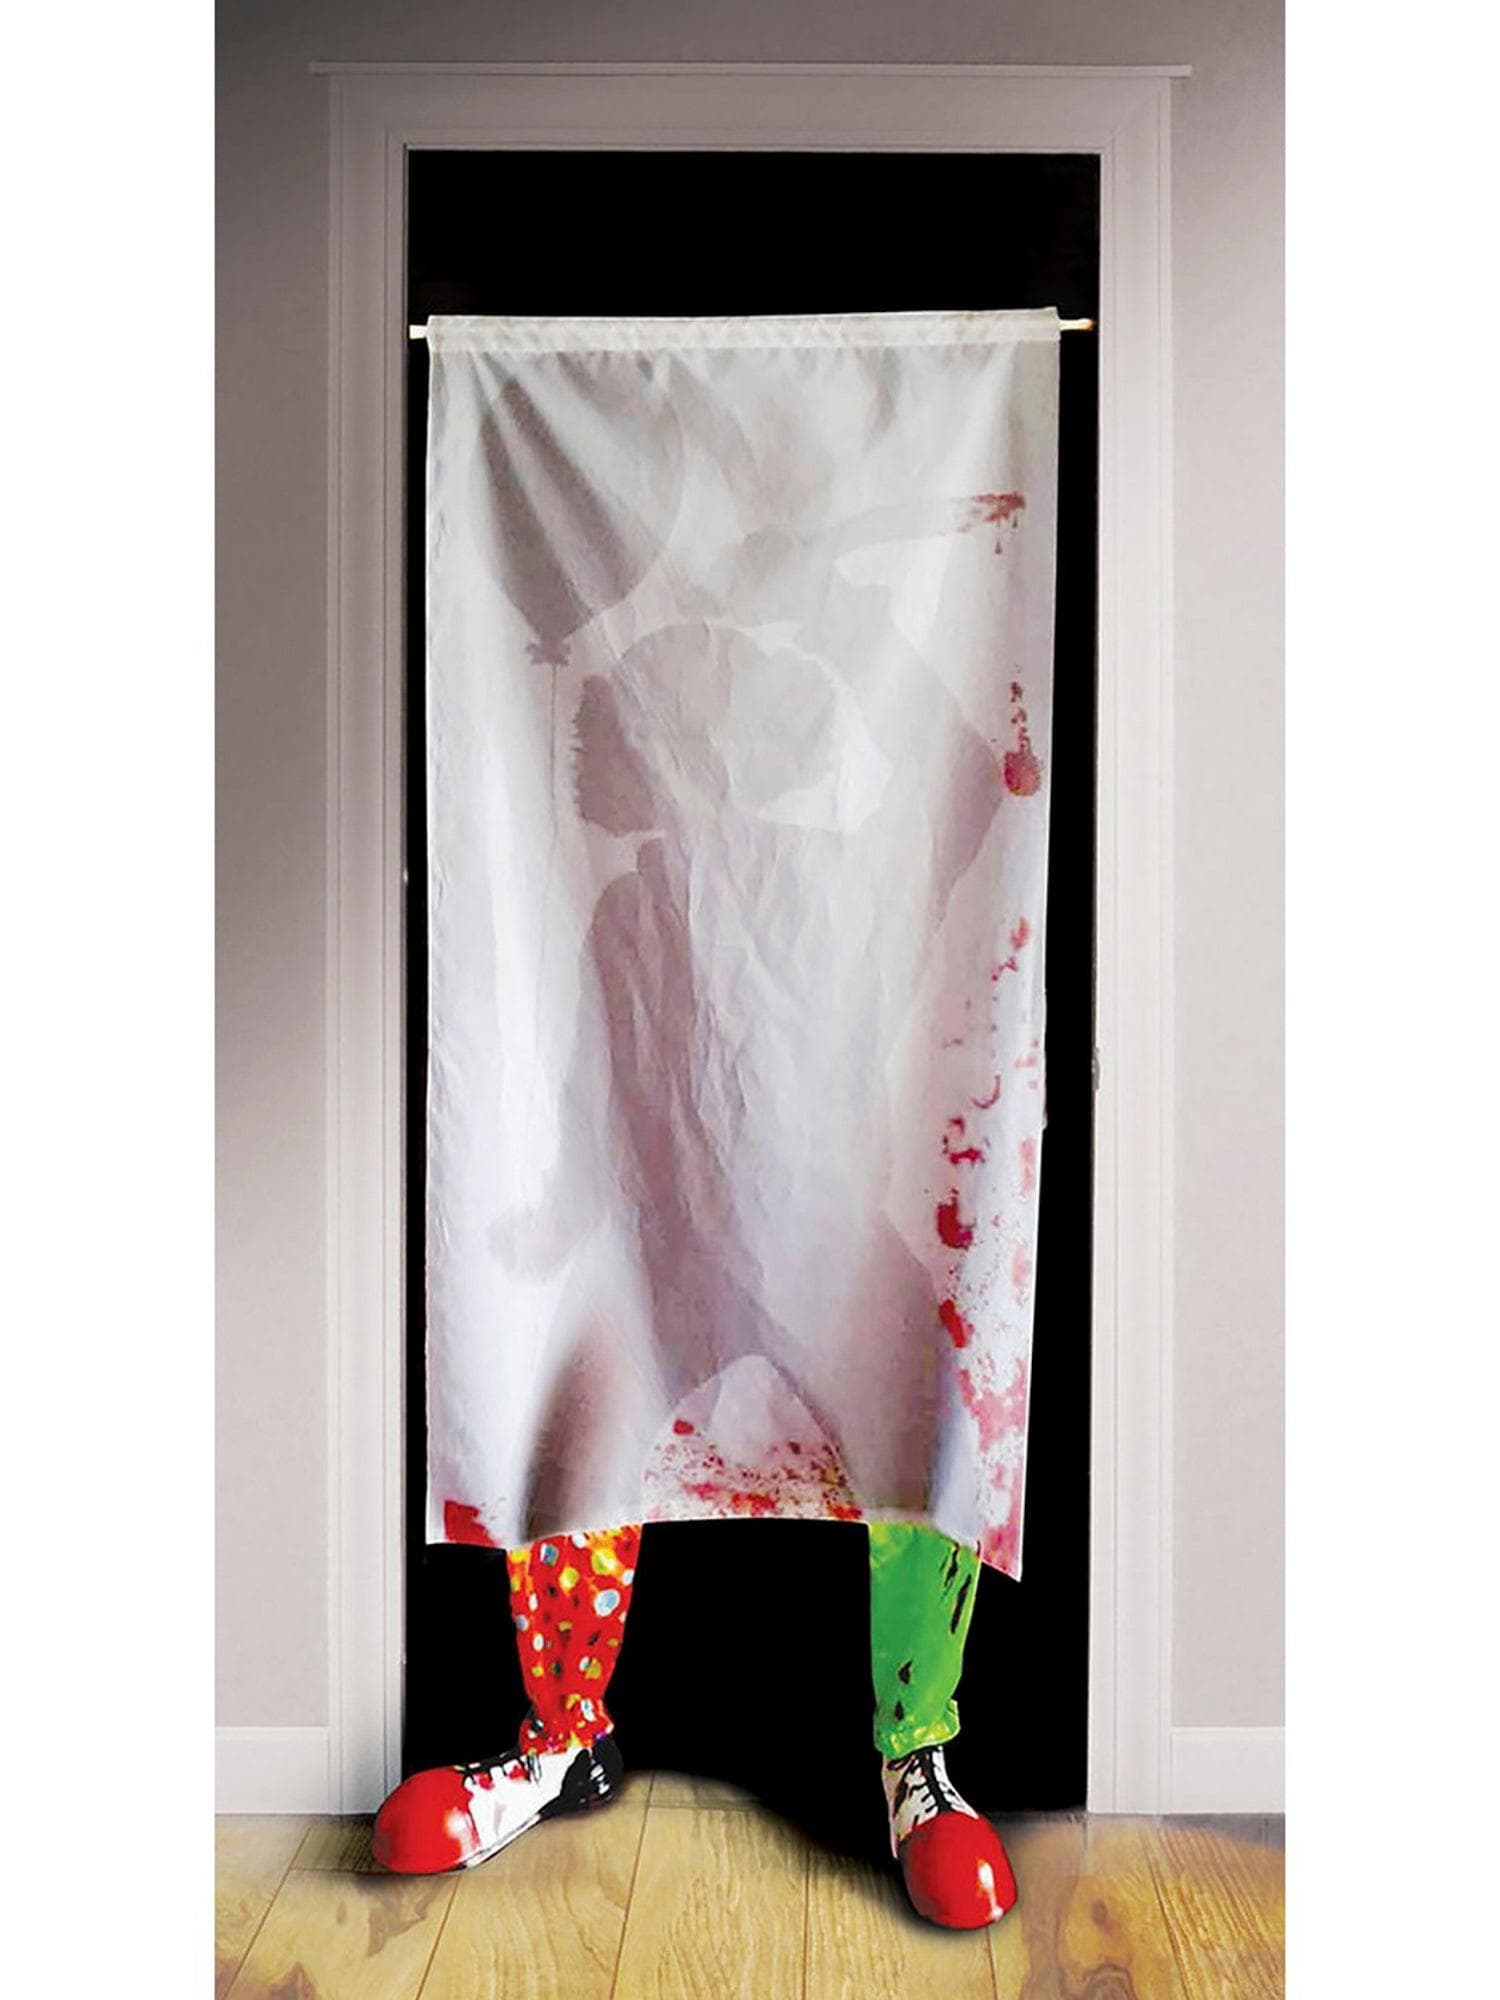 6 Foot Bloody Clown Killer Silhouette Curtain Hanging Prop - costumes.com